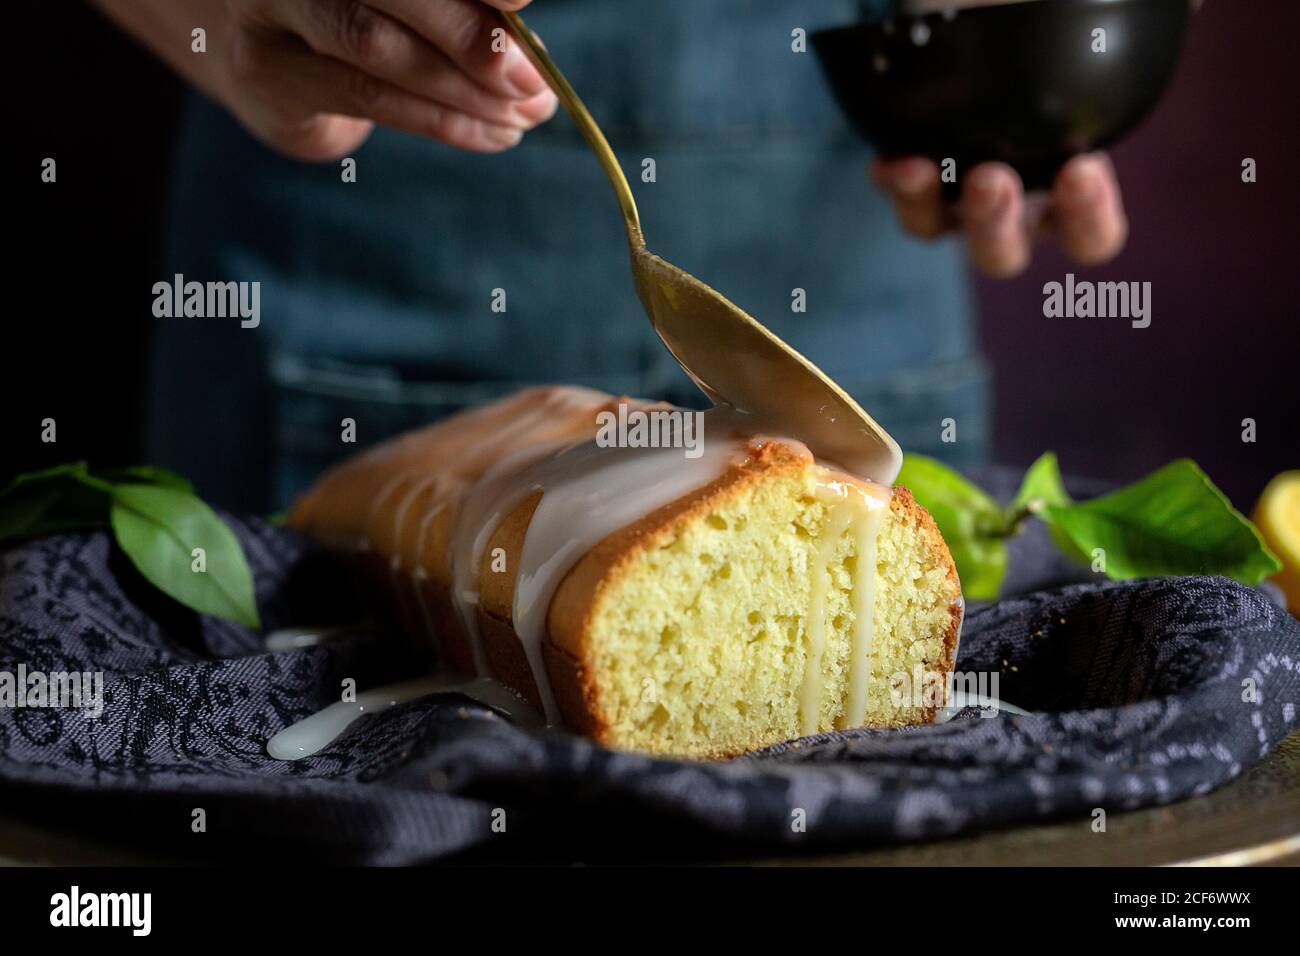 Cropped unrecognizable Woman hands pouring white sweet glaze on a homemade lemon cake Stock Photo